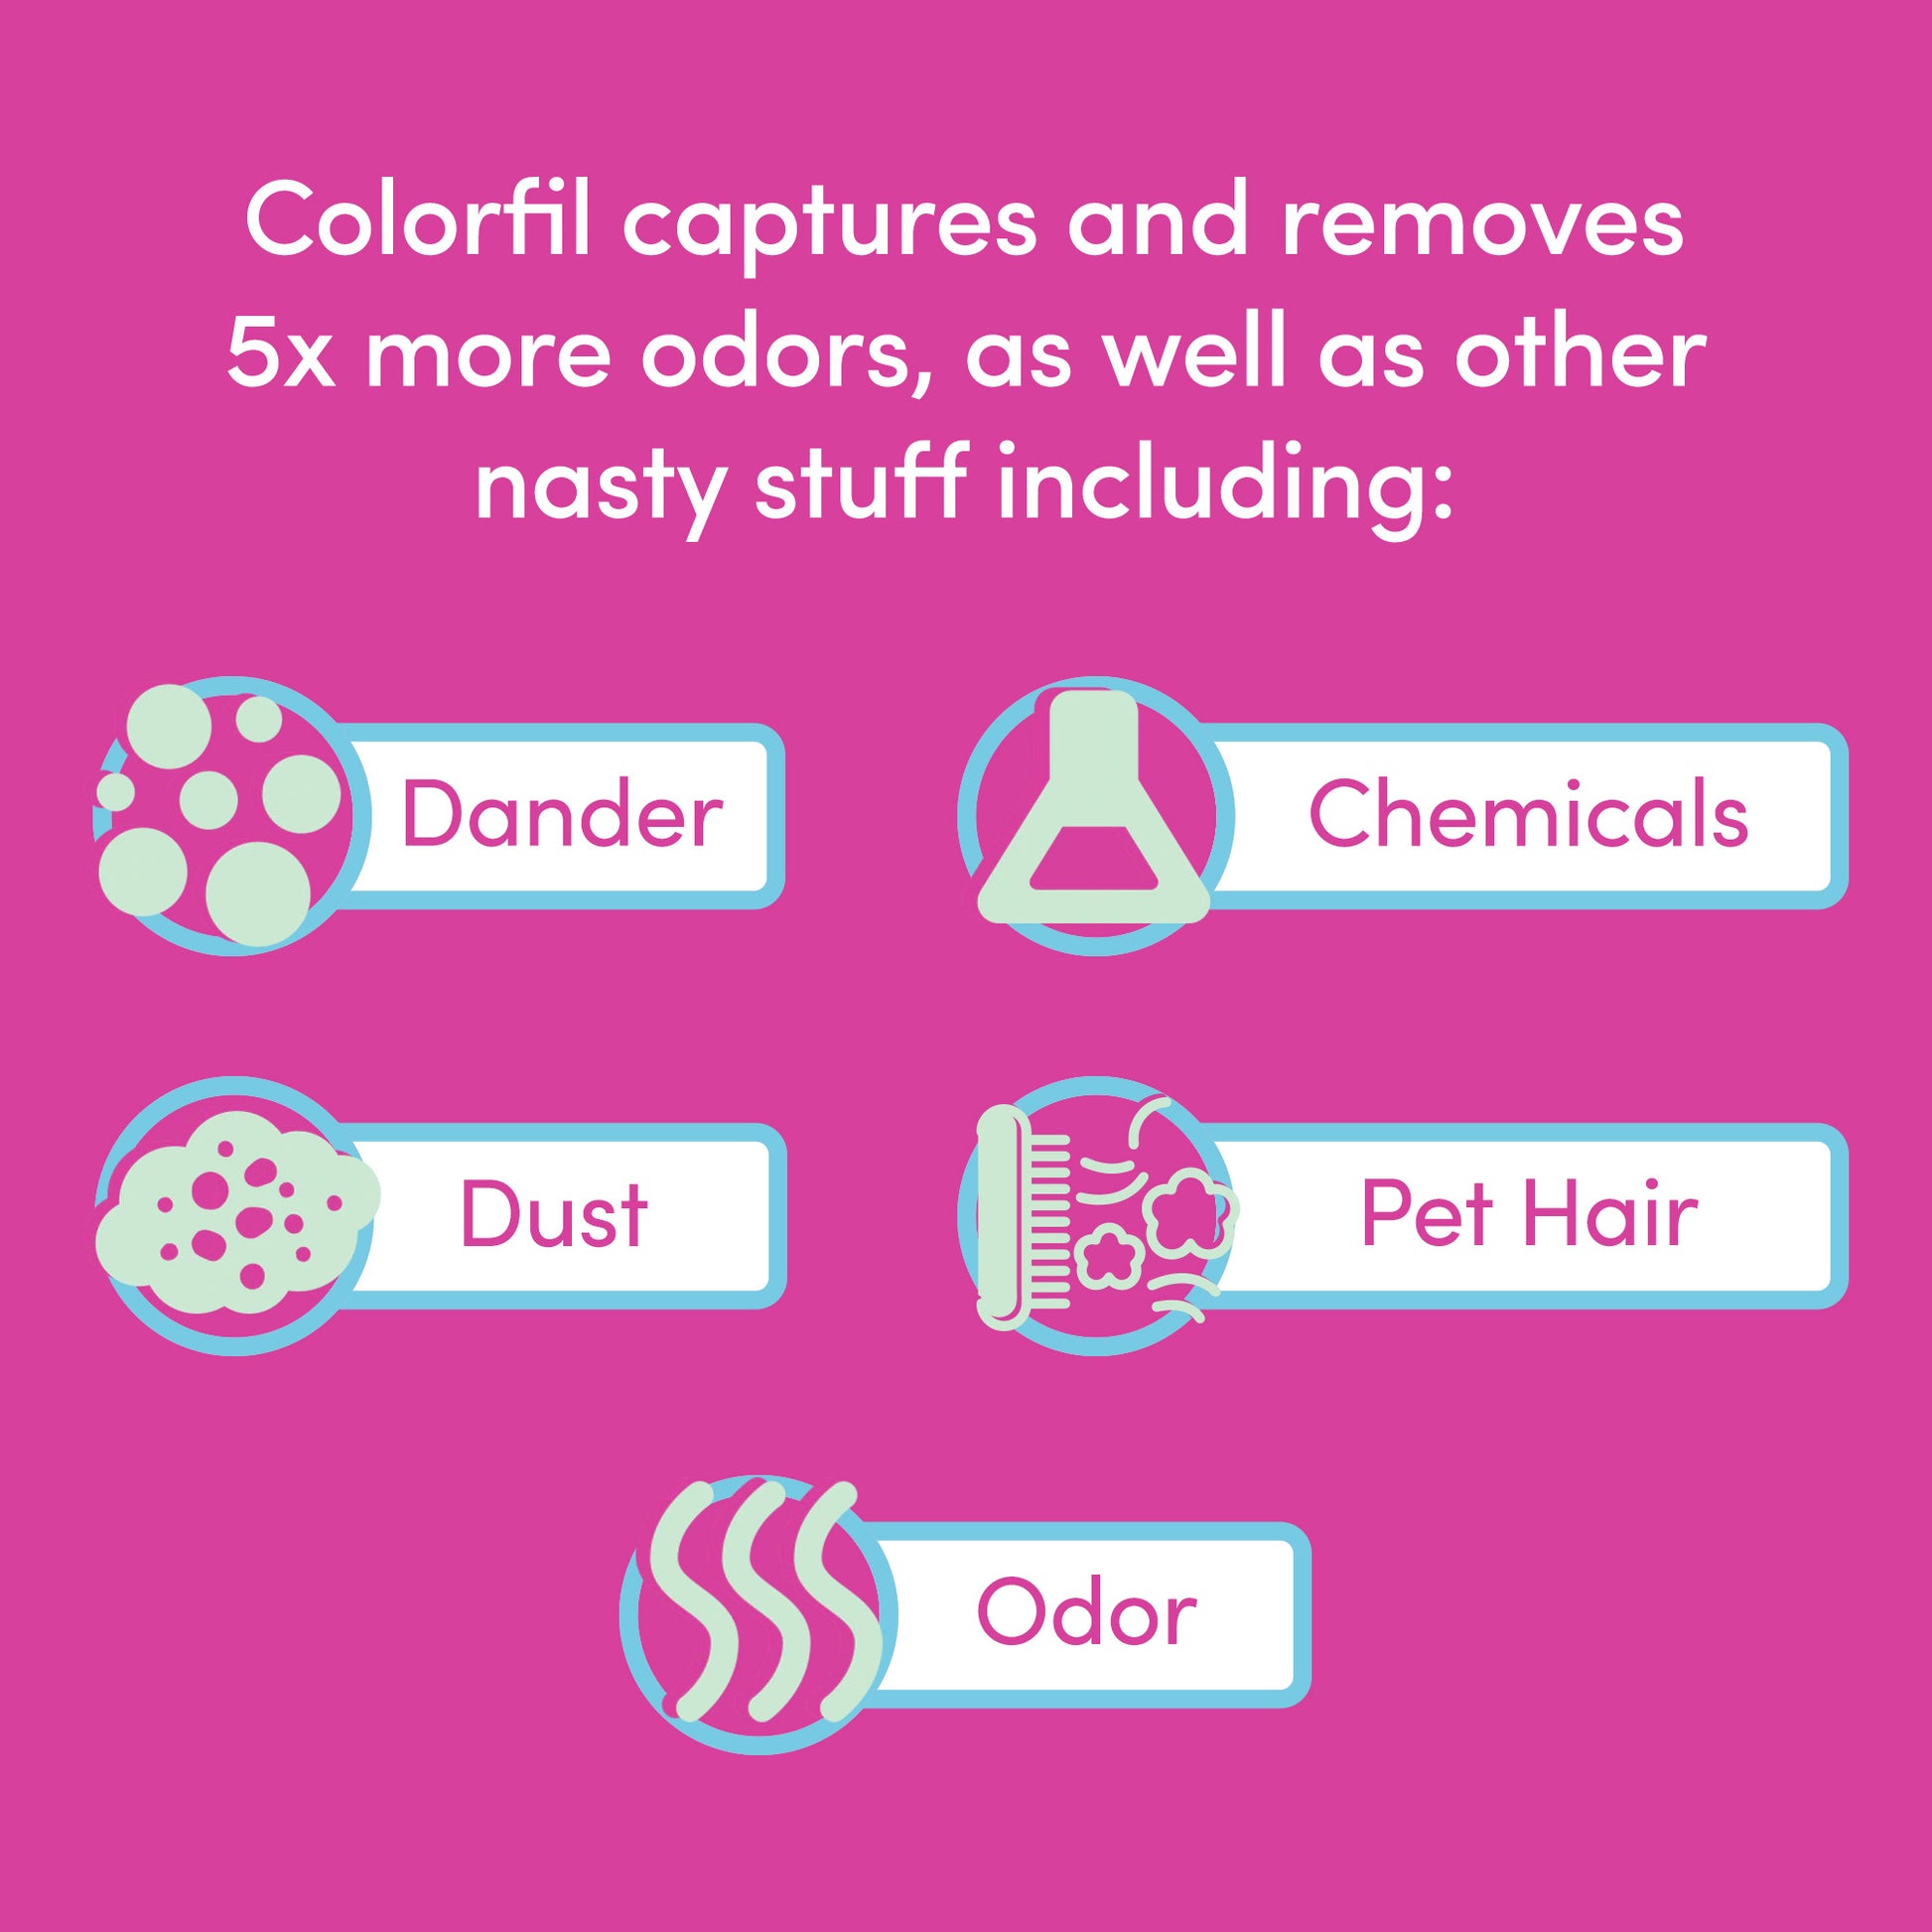 Image of what Colorfil air filters capture and remove. Icons represent dander, chemicals, dust, hair, and odor.